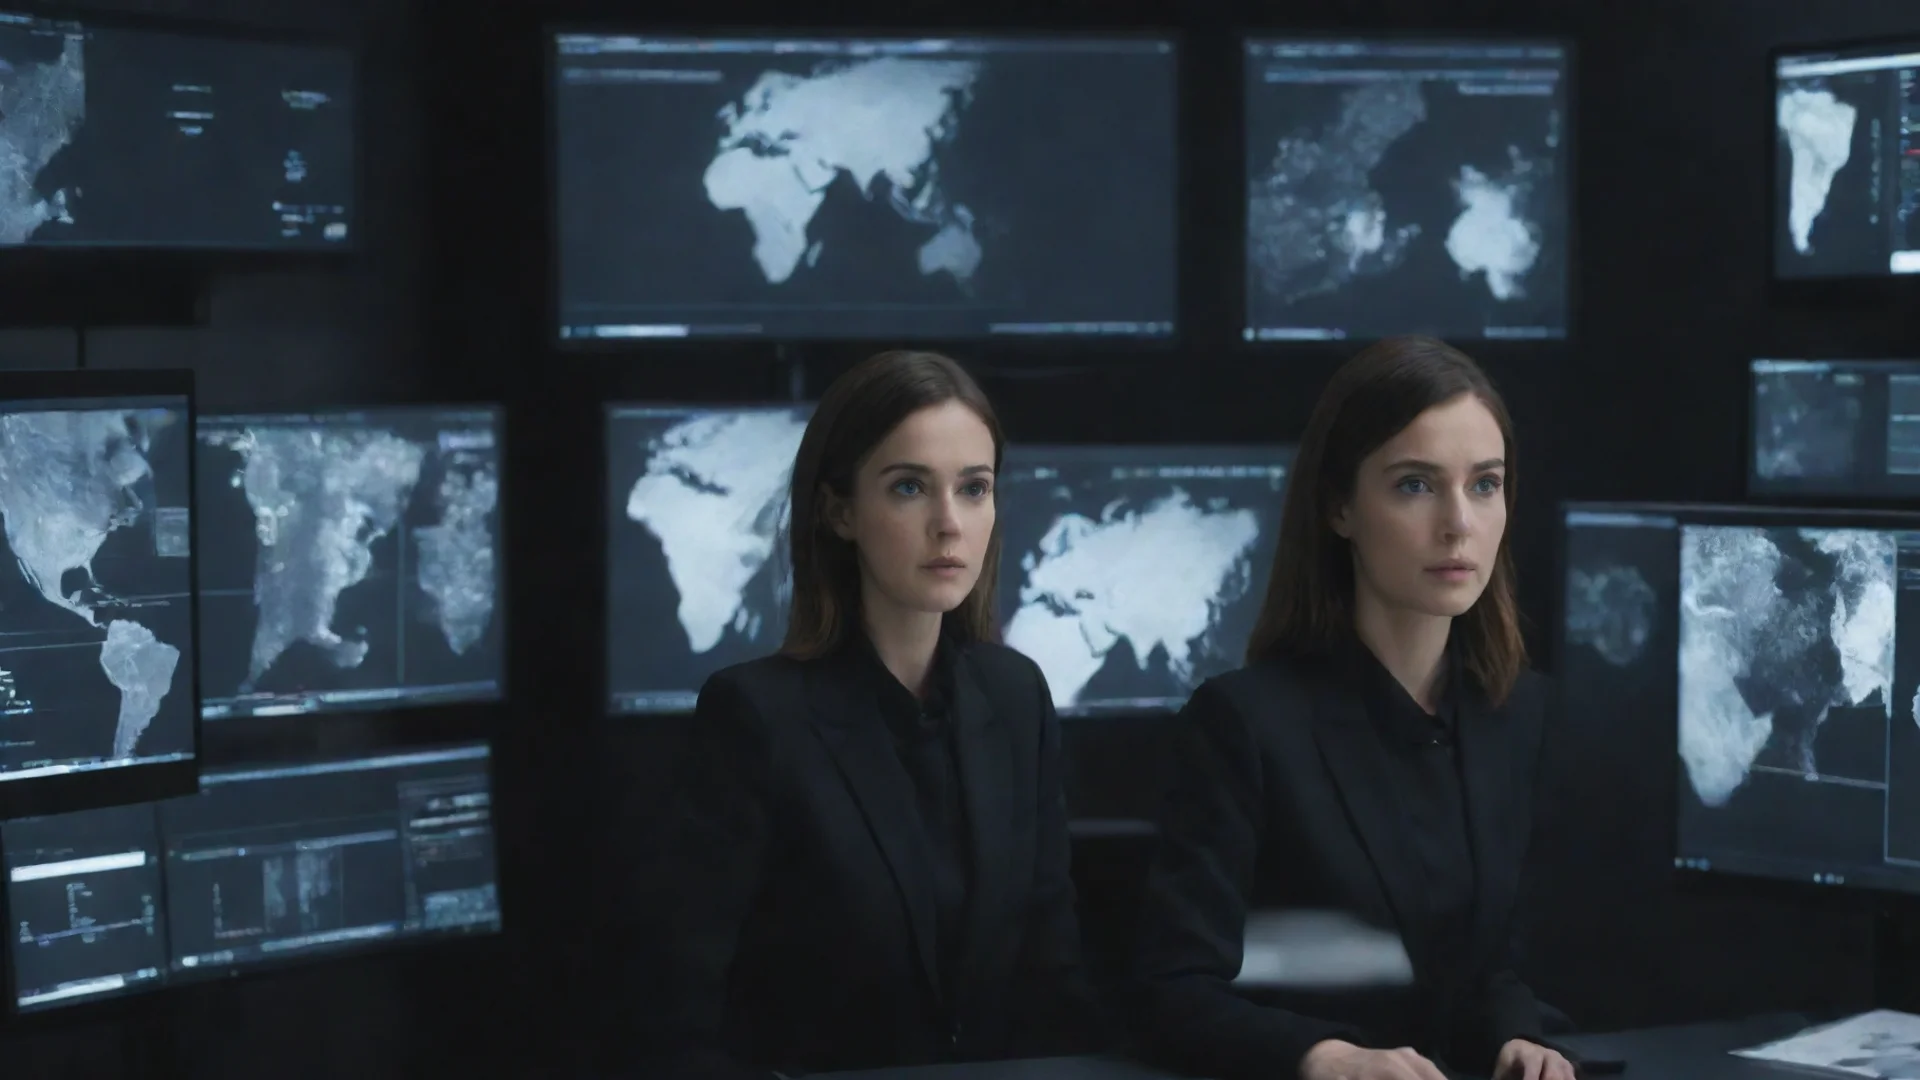 aiamazing image of a multi screen desktop with ai hollowgram images being operated by an lady agent in  a black suit awesome portrait 2 wide